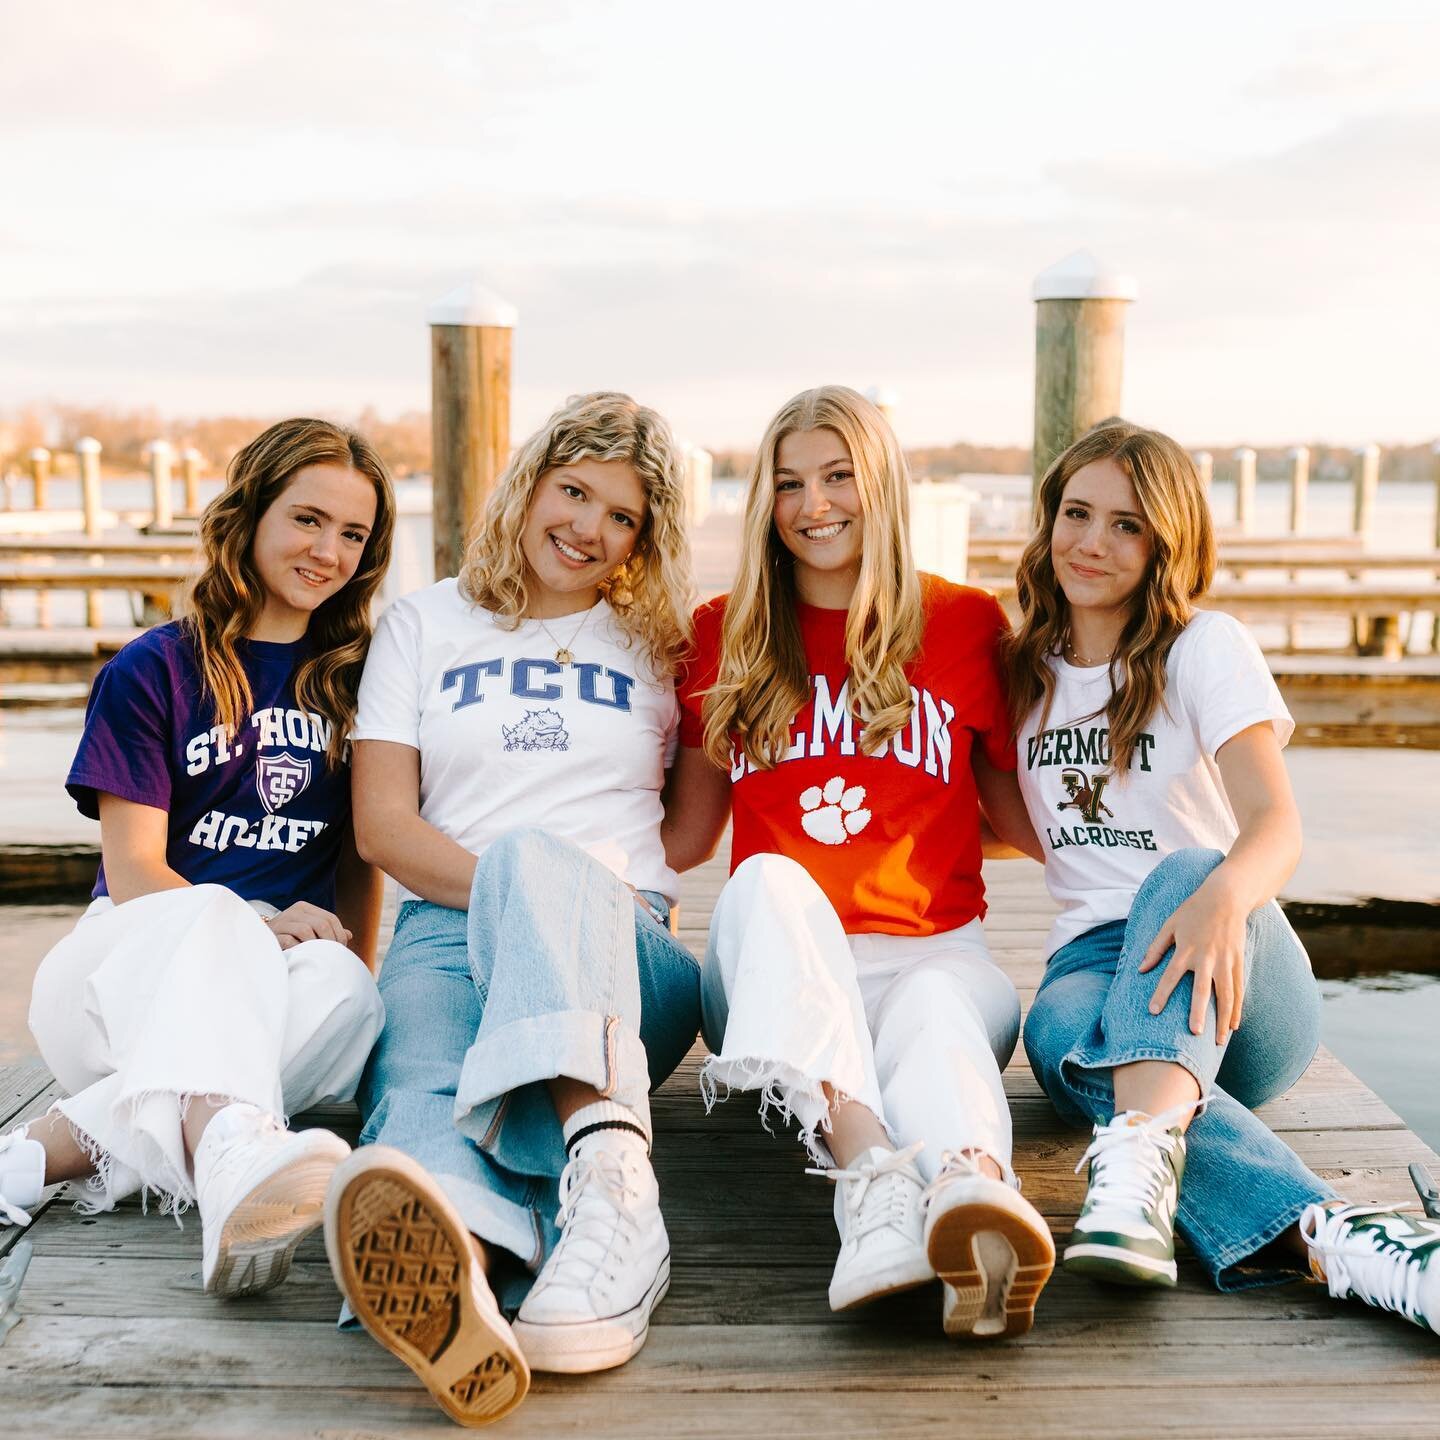 First grad session of the season with Sam &amp; her friends last night! 🤍